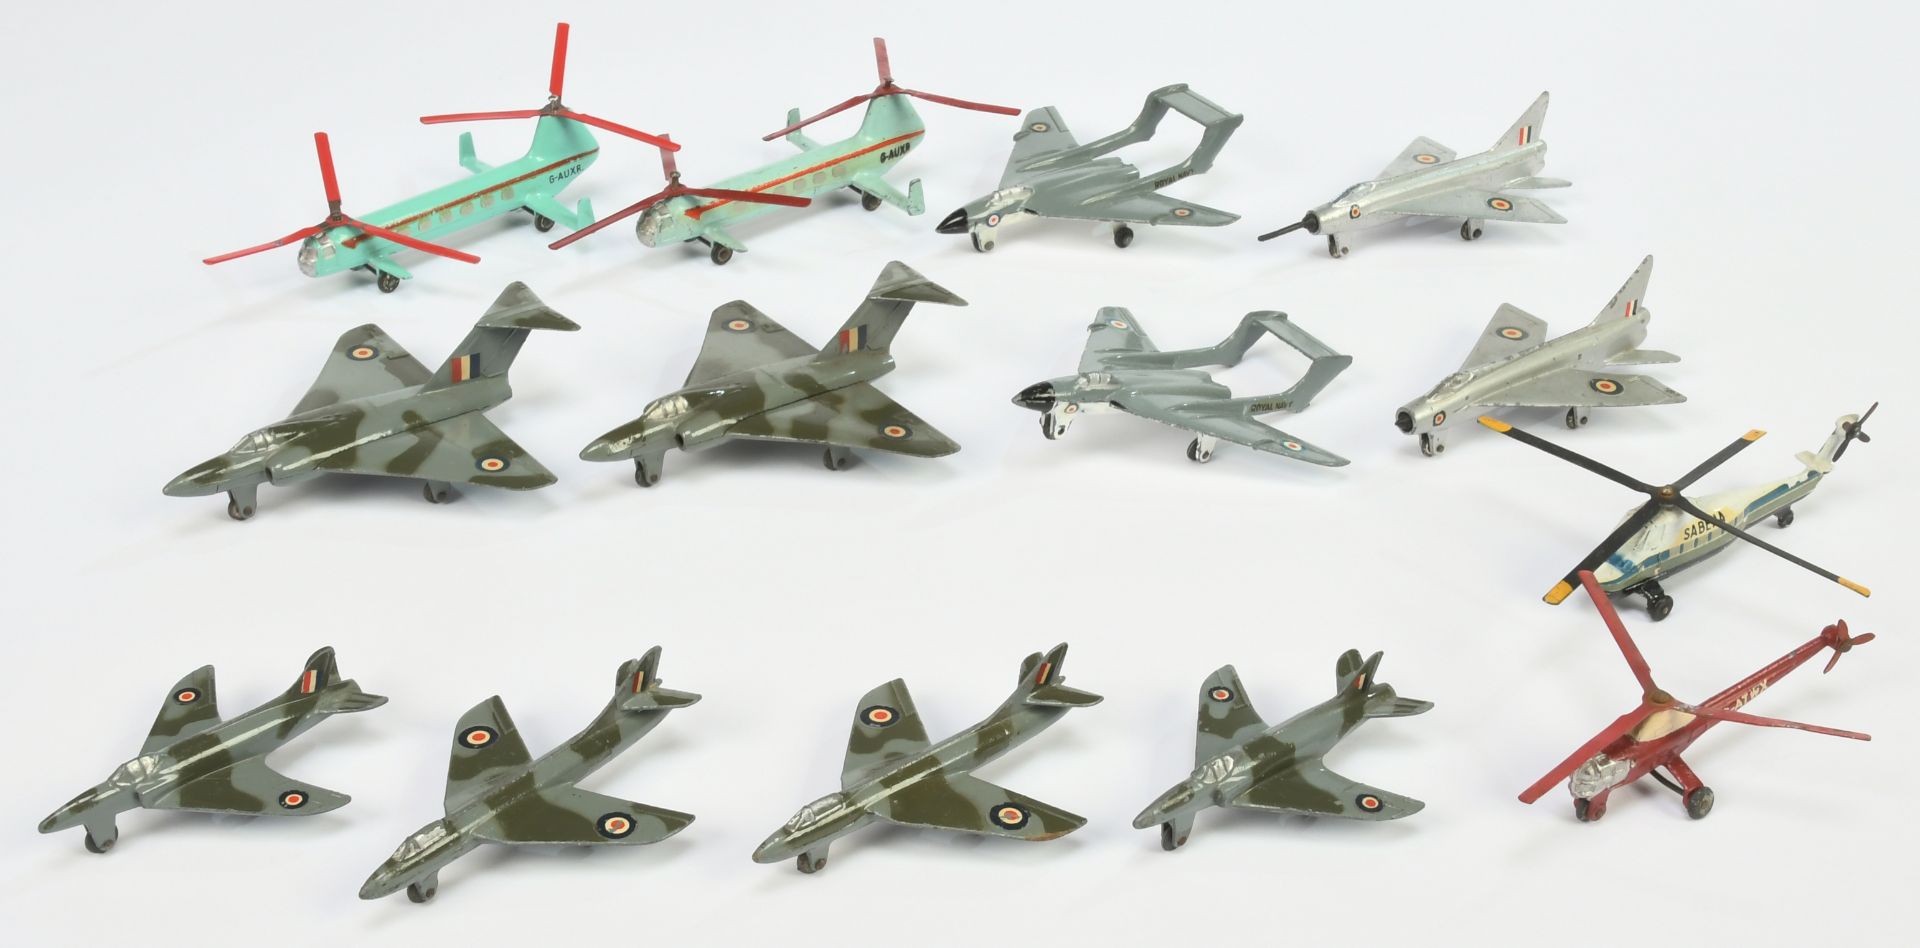 French Dinky Toys Aircraft Unboxed Group To Include - Sea Vixen, Gloster Javelin, PB Lightning  -...